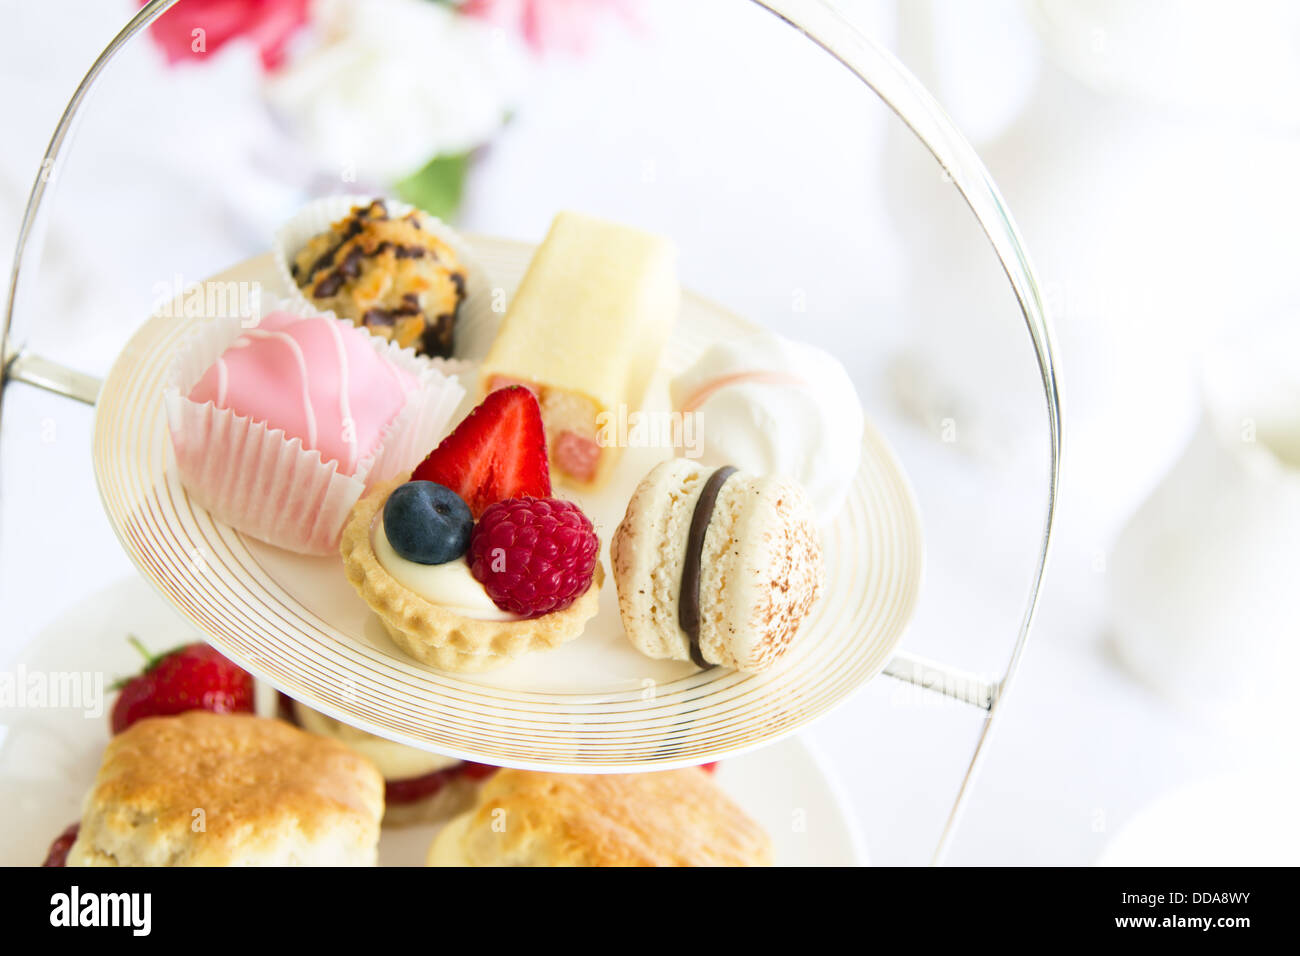 Afternoon tea served with an assortment of cakes Stock Photo